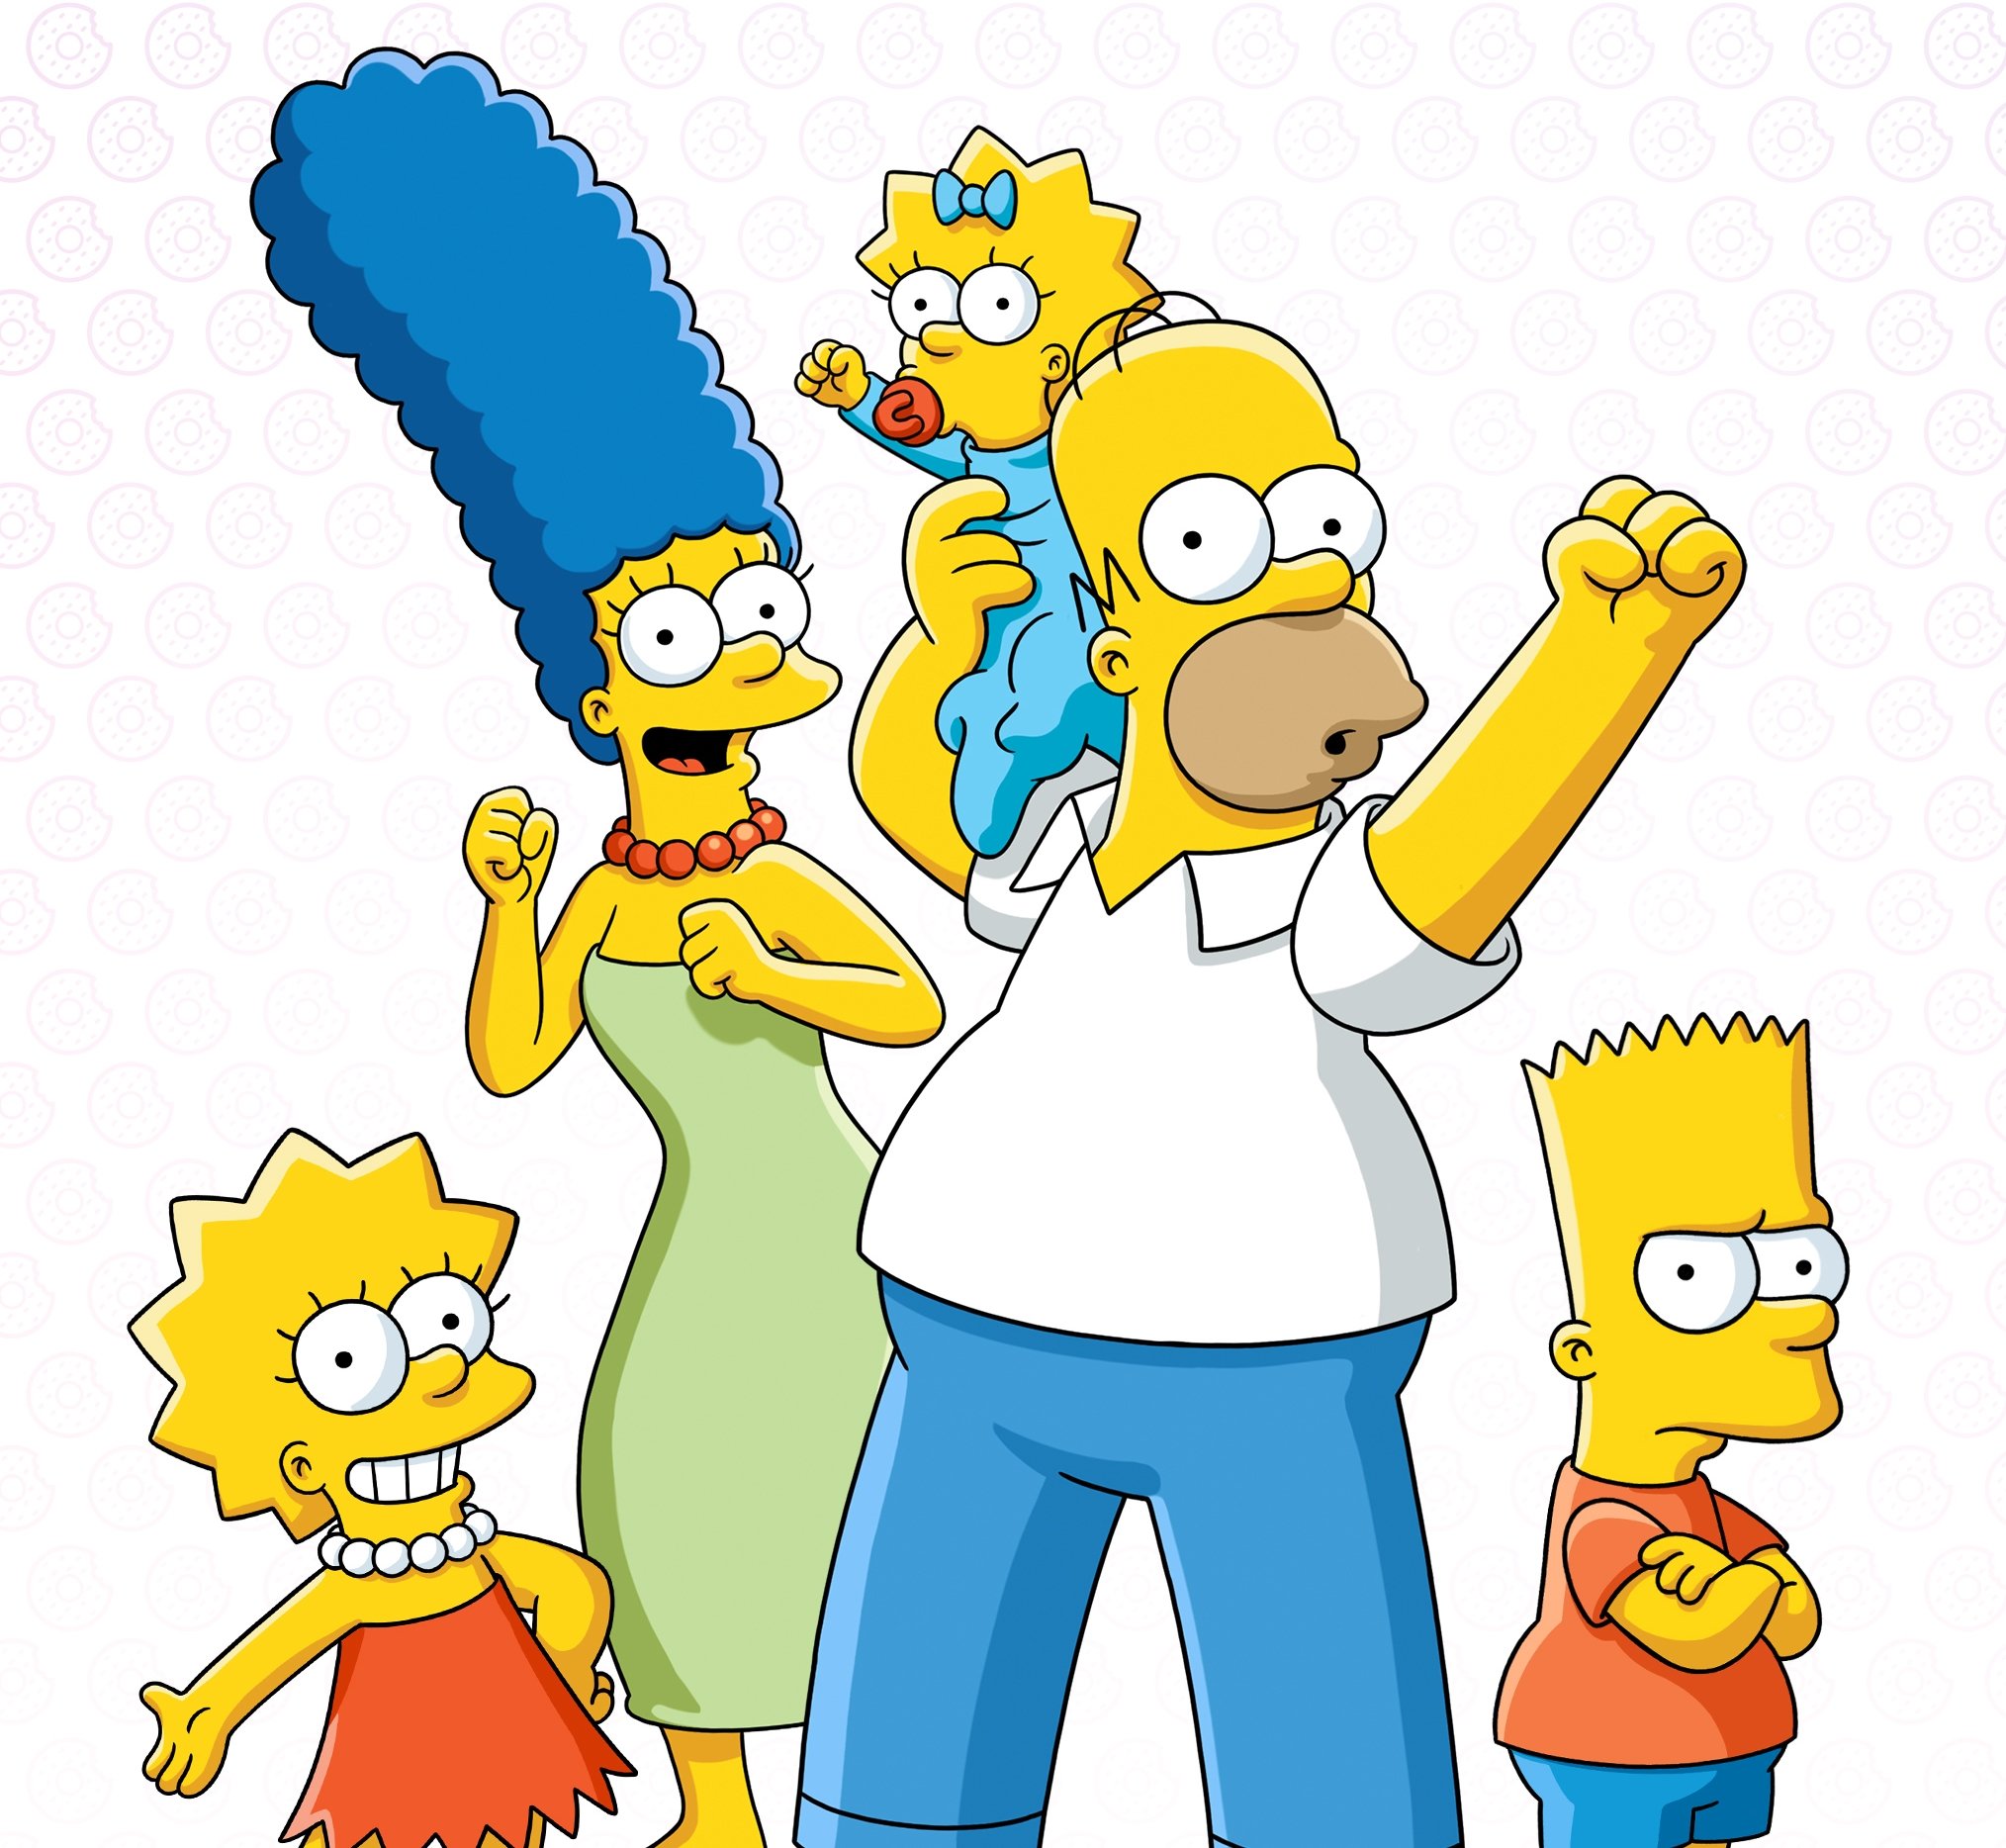 The Simpsons family all smiling except Bart